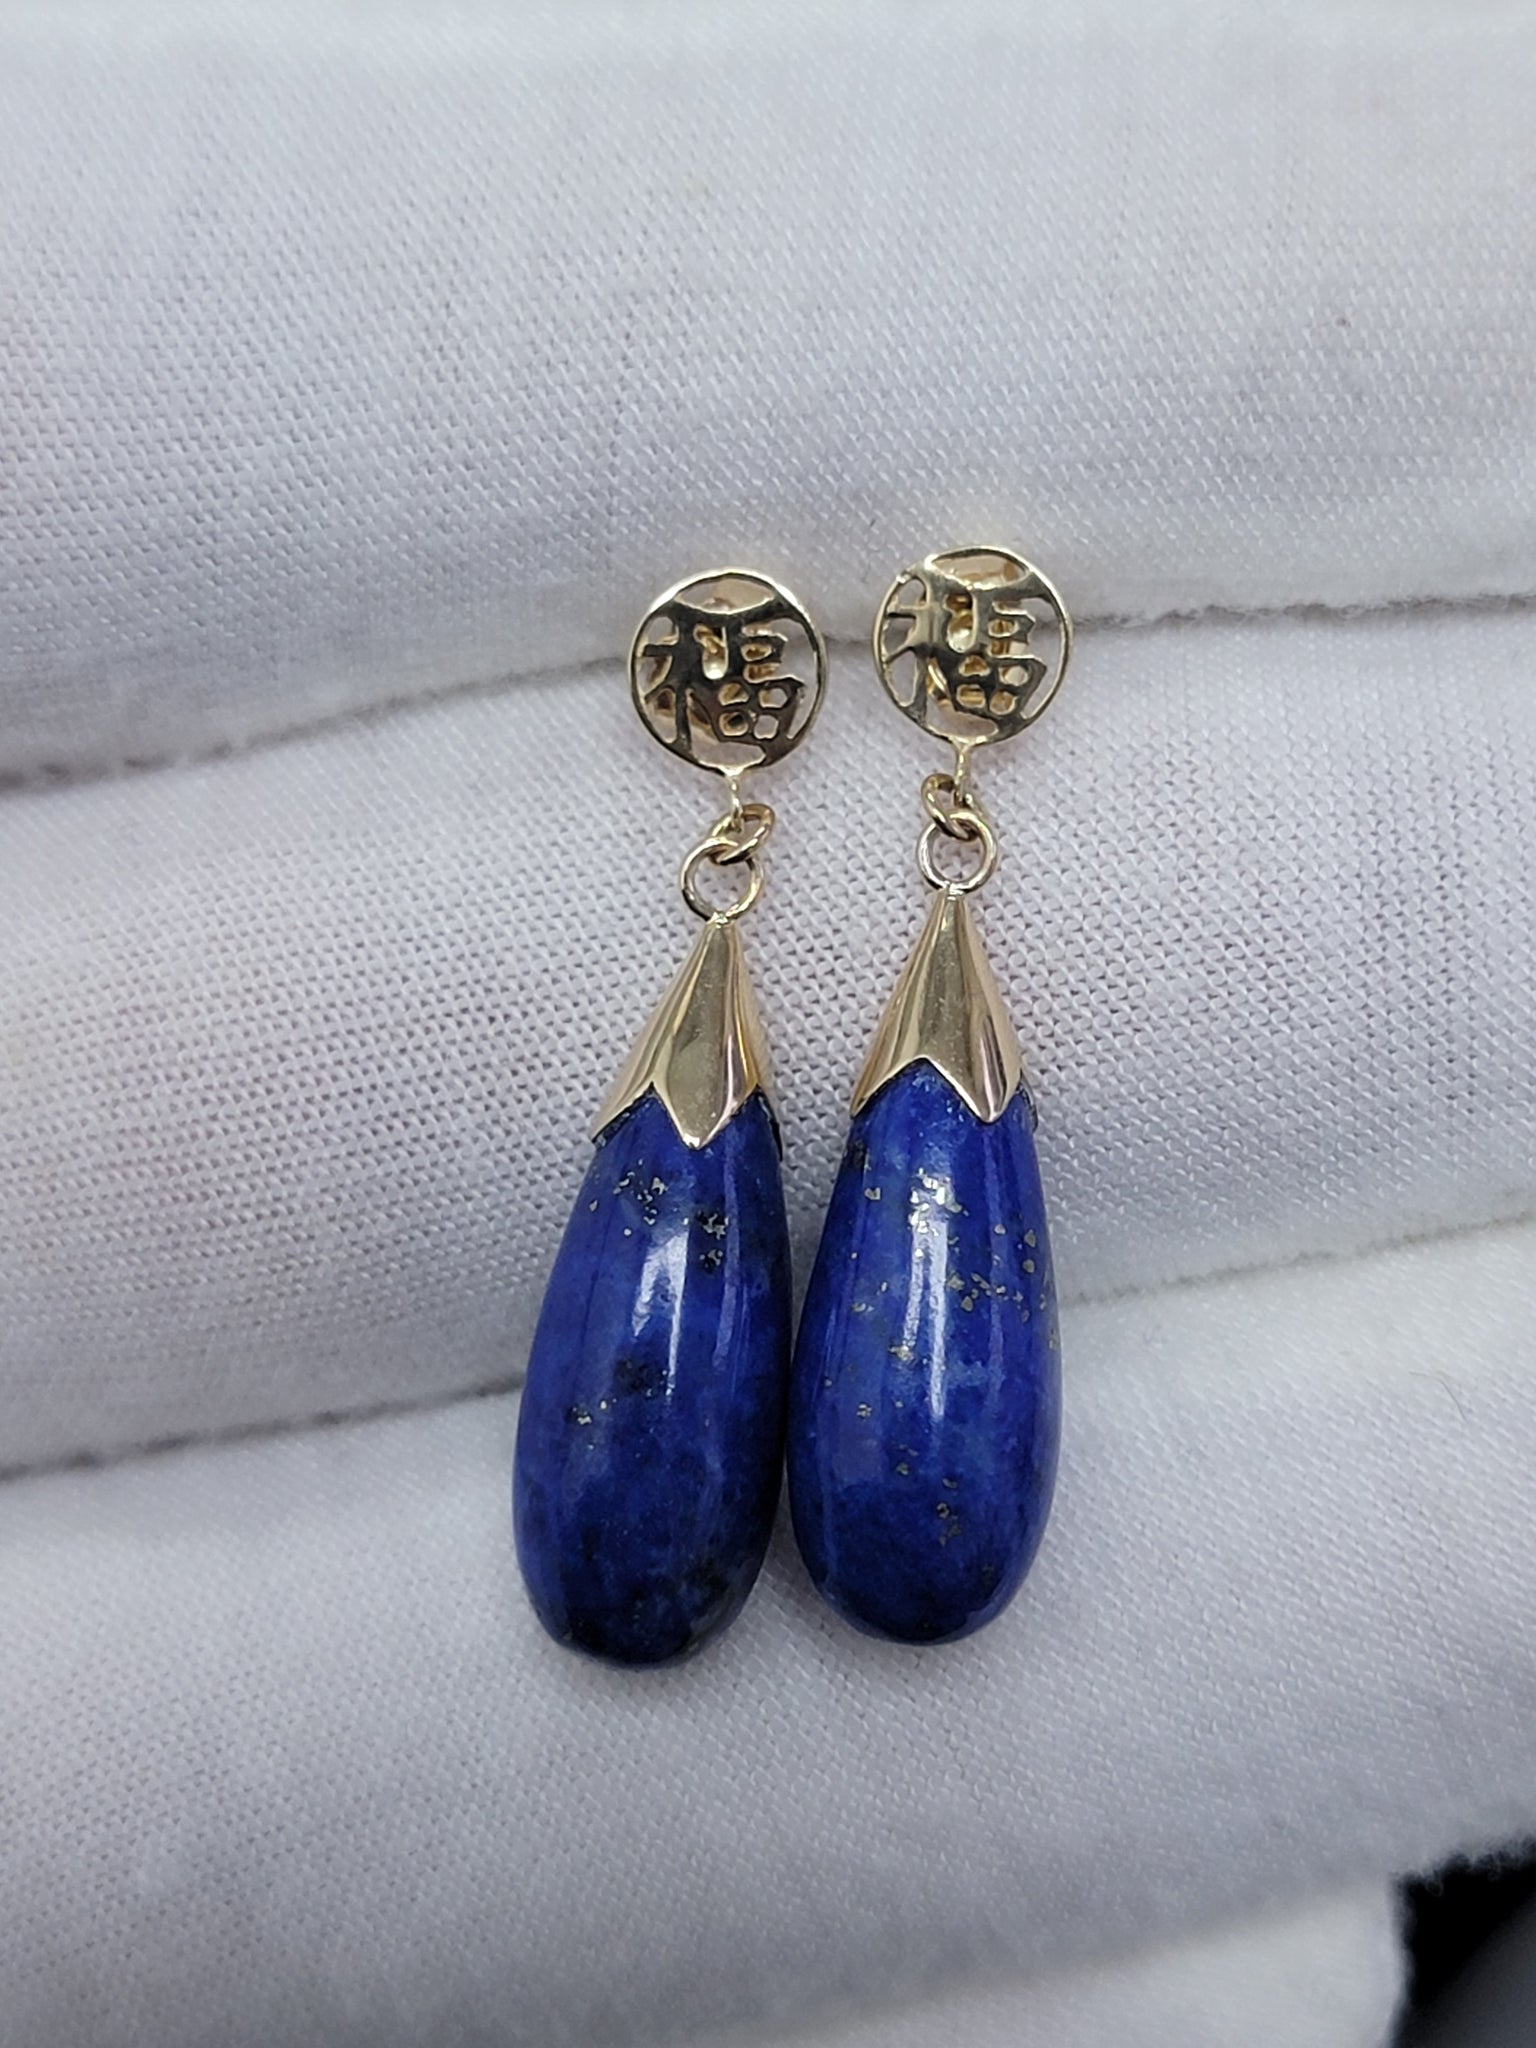 Tudor 14k Gold, Lapis and Pearl Earrings : Museum of Jewelry